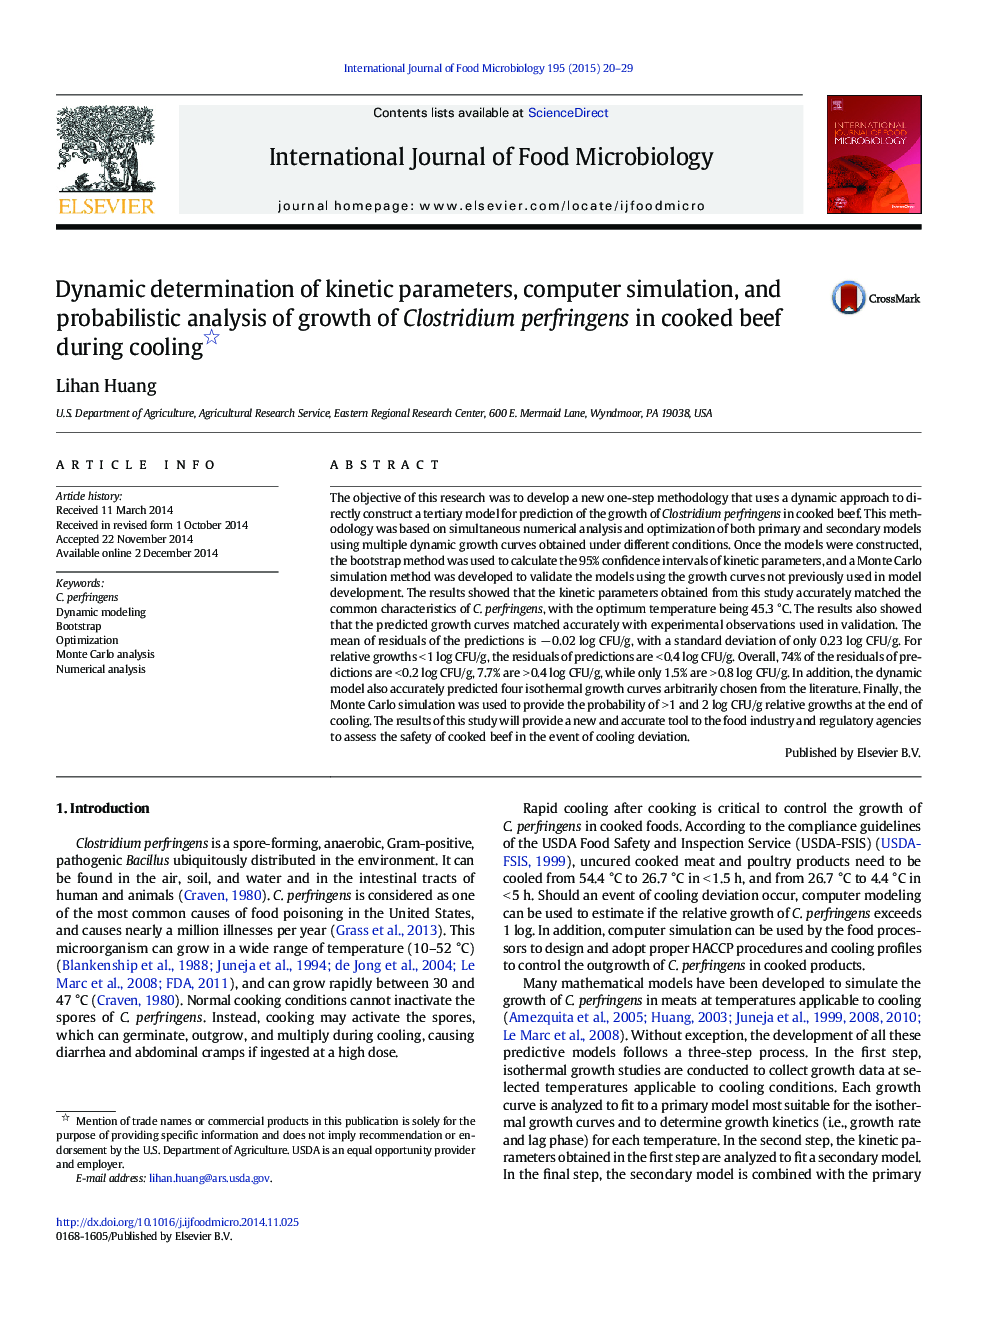 Dynamic determination of kinetic parameters, computer simulation, and probabilistic analysis of growth of Clostridium perfringens in cooked beef during cooling